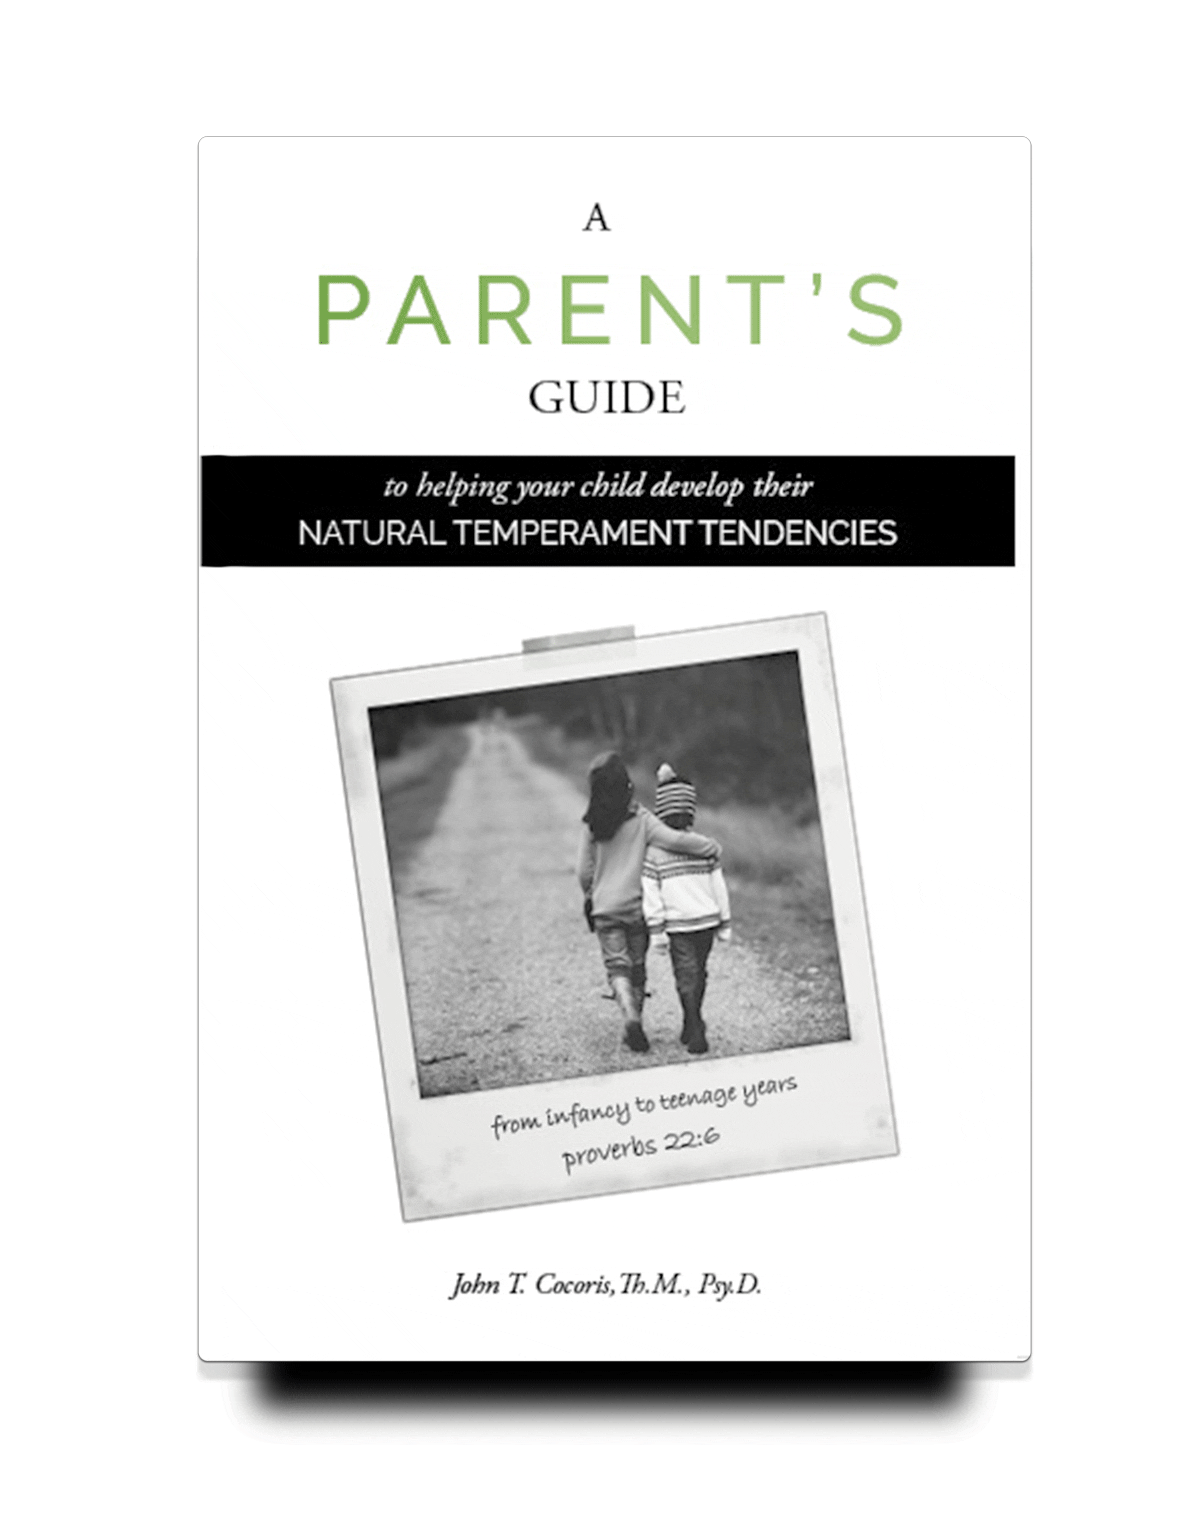 A Parent's Guide to Helping Your Child Develop Their Natural Temperament Tendencies